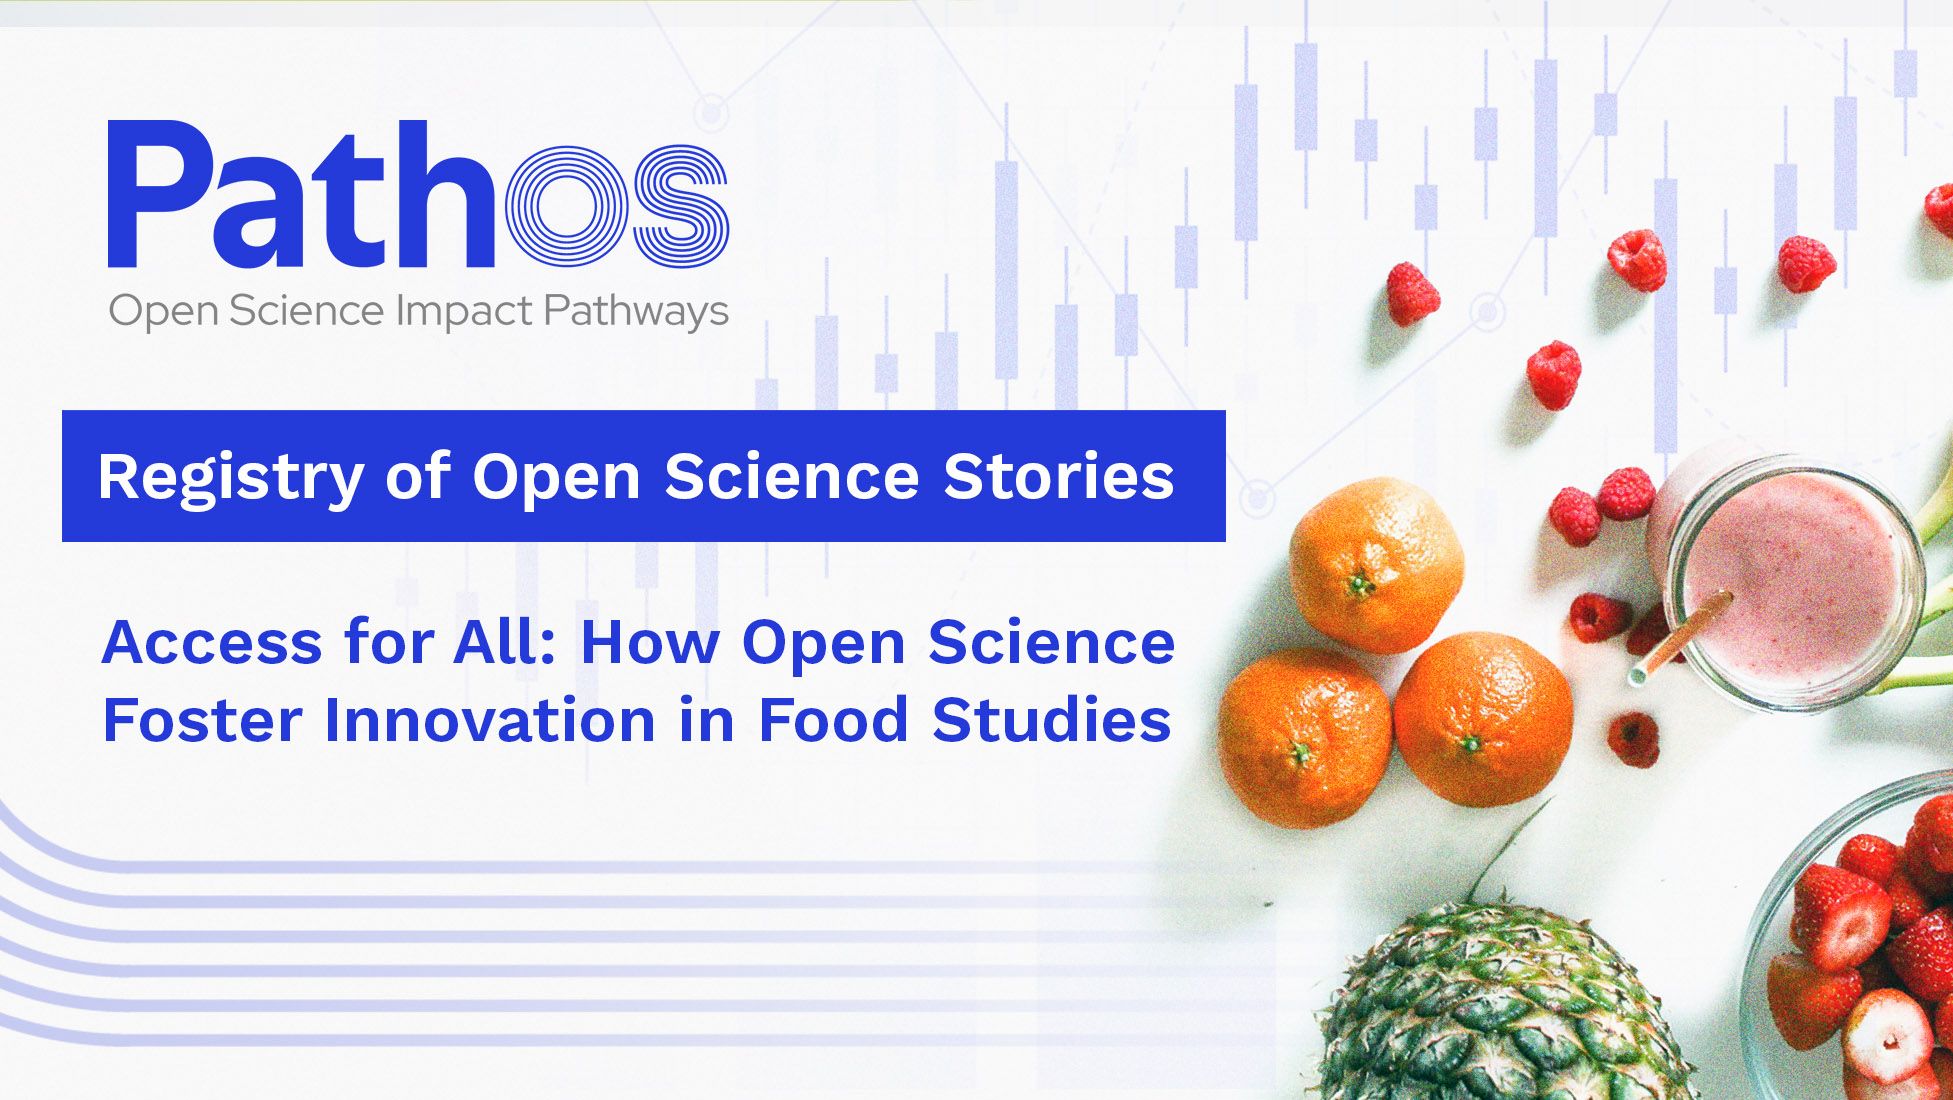 https://pathos-project.eu/access-for-all-how-open-science-foster-innovation-in-food-studies